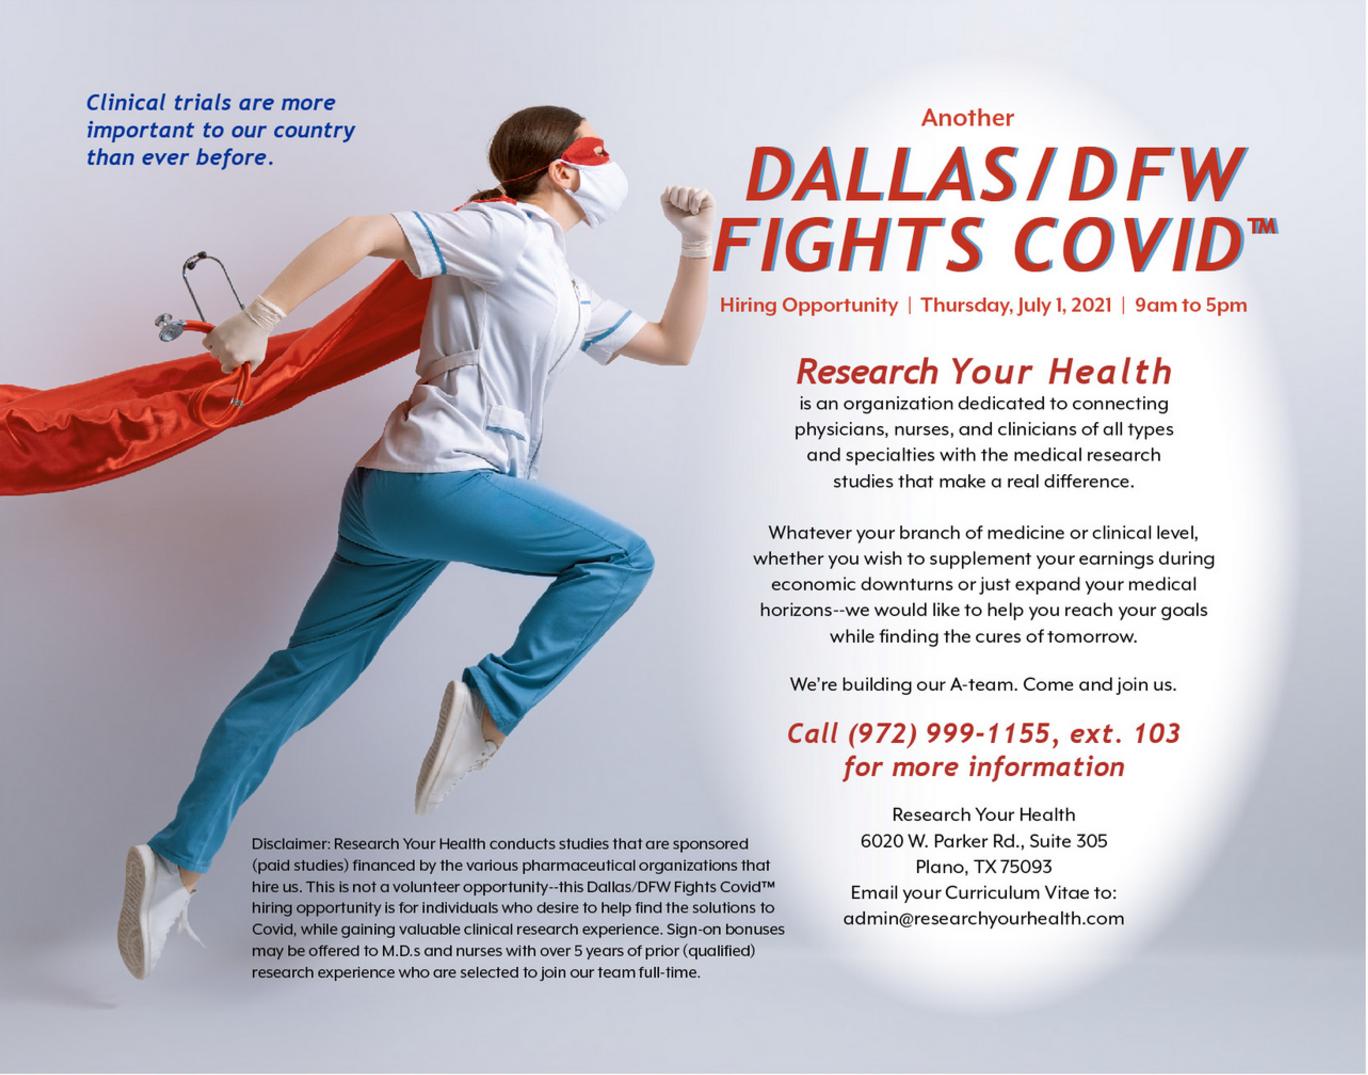 Clinical trials are more important to our country than ever before. Another Dallas-DFW Fights Covid(TM) HIring Opportunity - Thursday July 1 2021 - 9am to 5pm - Research Your Health is an organization dedicated to connecting physicians, nurses, and clinicians of all types and specialties wit the medical research studies that make a real difference. Whatever your branch of medicine or clinical level, whether you wish to supplement your earnings during economic downturns or just expand your medical horizons--we would like to help you reach your goals while finding the cures of tomorrow. We're building our A-team. Come and join us. Call (972) 999-1155, ext. 103 for more information. Disclaimer: Research Your Health conducts studies that are sponsored (paid studies) financed by the various pharmaceutical organizations that hire us. This is not a volunteer opportunity--this Dallas/DFW Fights Covid(TM) hiring opportunity is for individuals who desire to help find the solutions to Covid, while gaining valuable clinical research experience. Sign-on bonuses may be offered to M.D.s and nurses with over 5 years of prior (qualified) research experience who are selected to join our team full-time. Research Your Health, 6020 W. Parker Rd., Suite 305, Plano, TX 75093. Email your Curriculum Vitae to: admin@researchyourhealth.com.